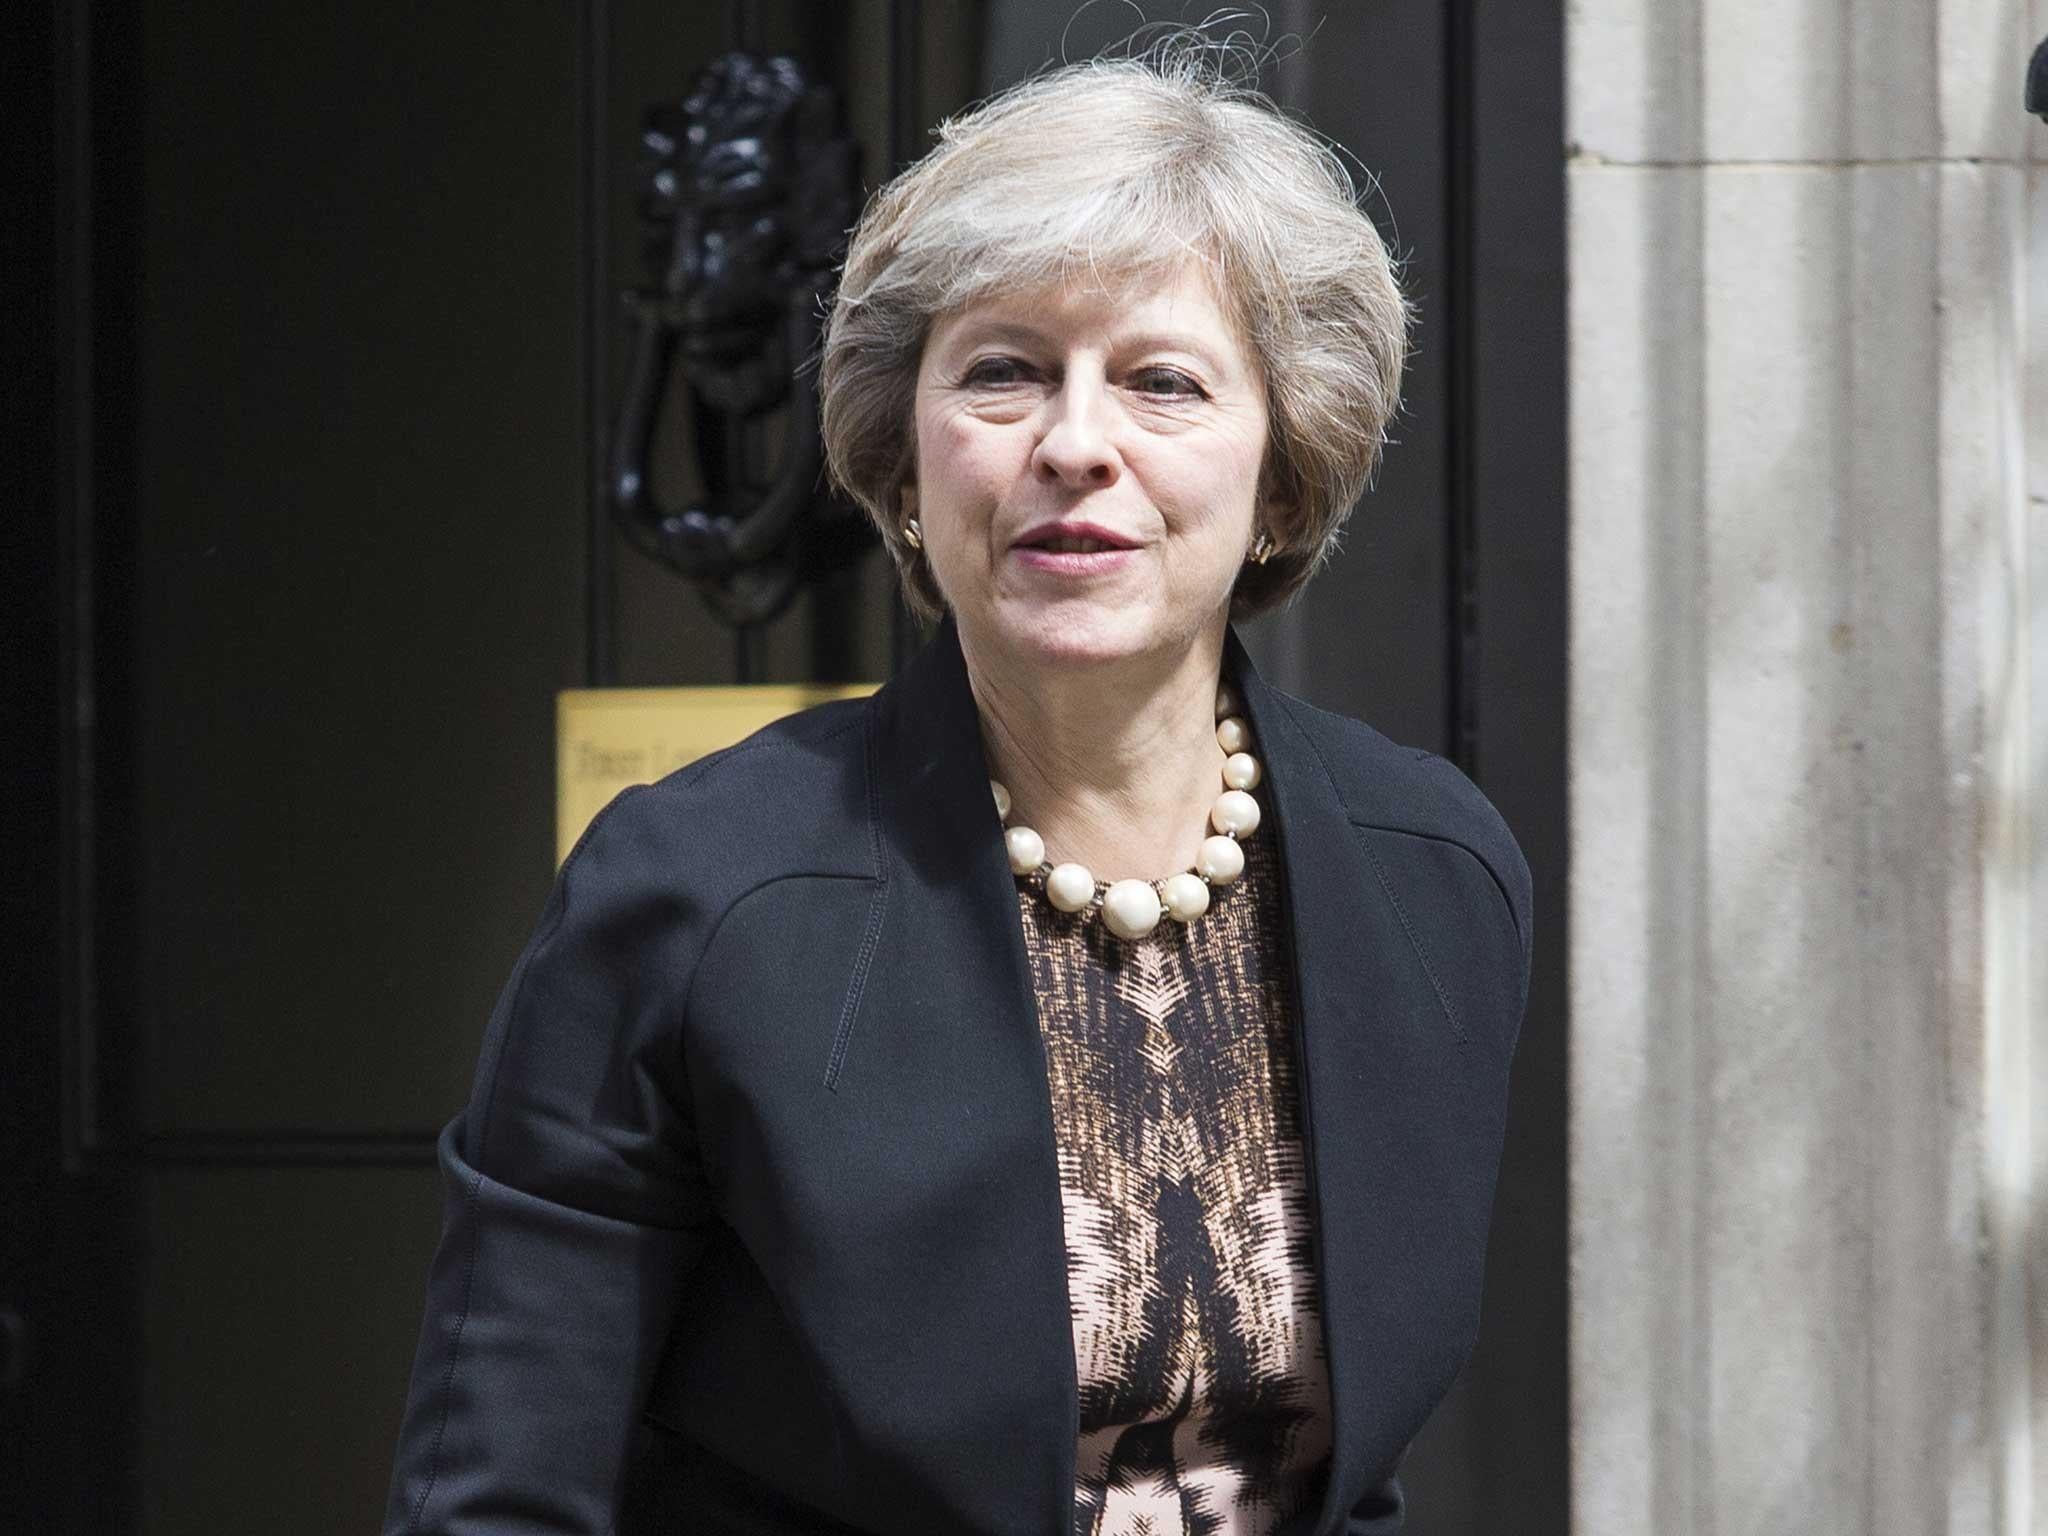 Theresa May won the support of 199 Conservative MPs